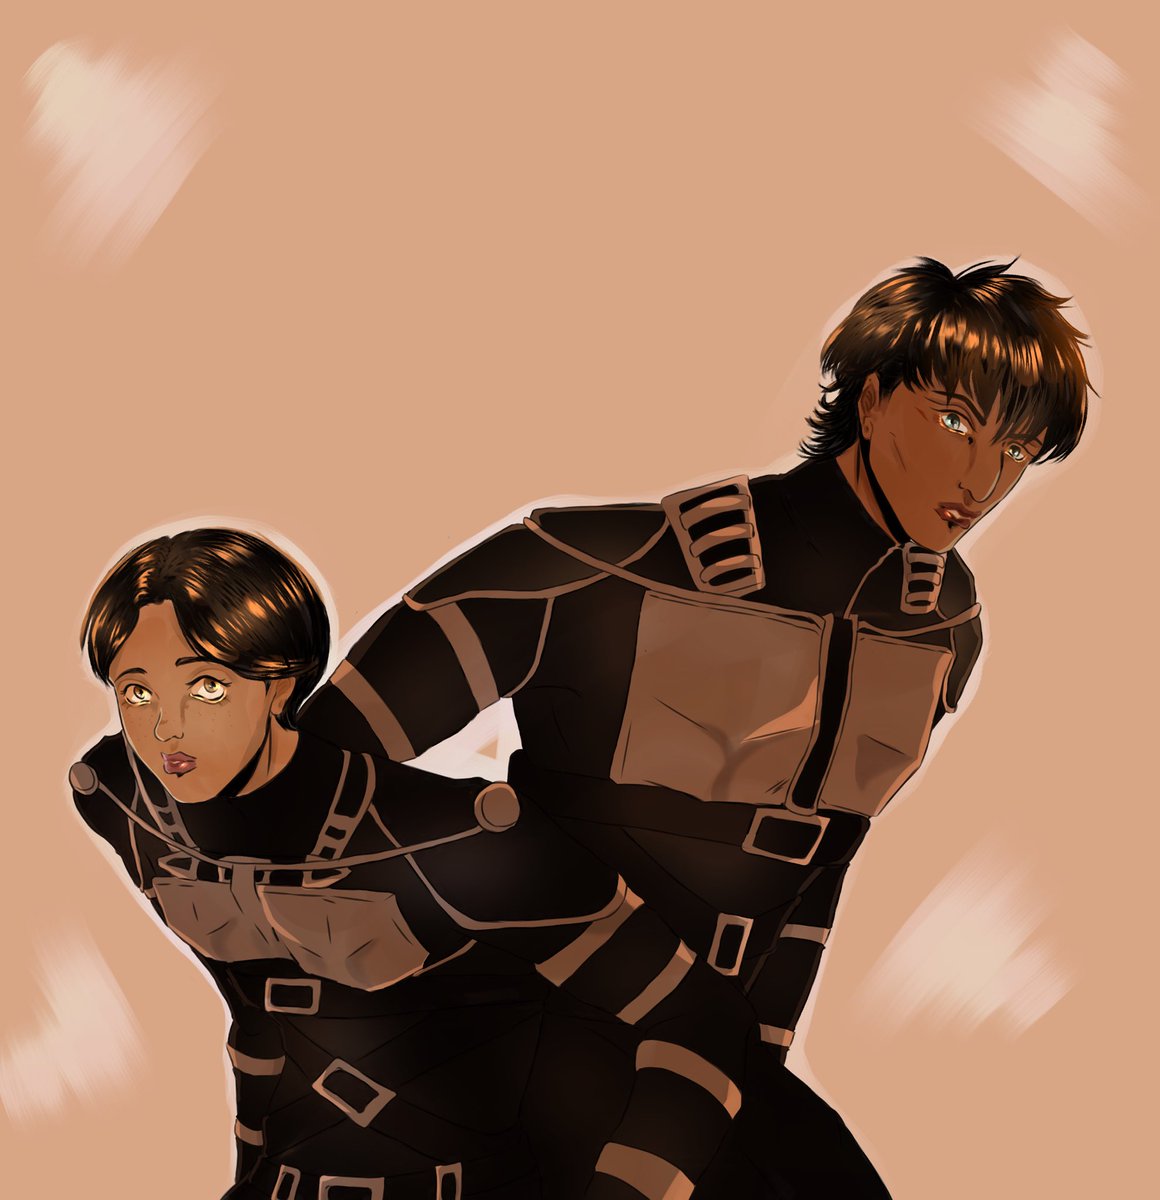 ITS BEEN SO LONG SO ITS KINDA ASS BUT ERMM #bertmarco #bertholdthoover #marcobodt #aot #SNK #Bertholdt